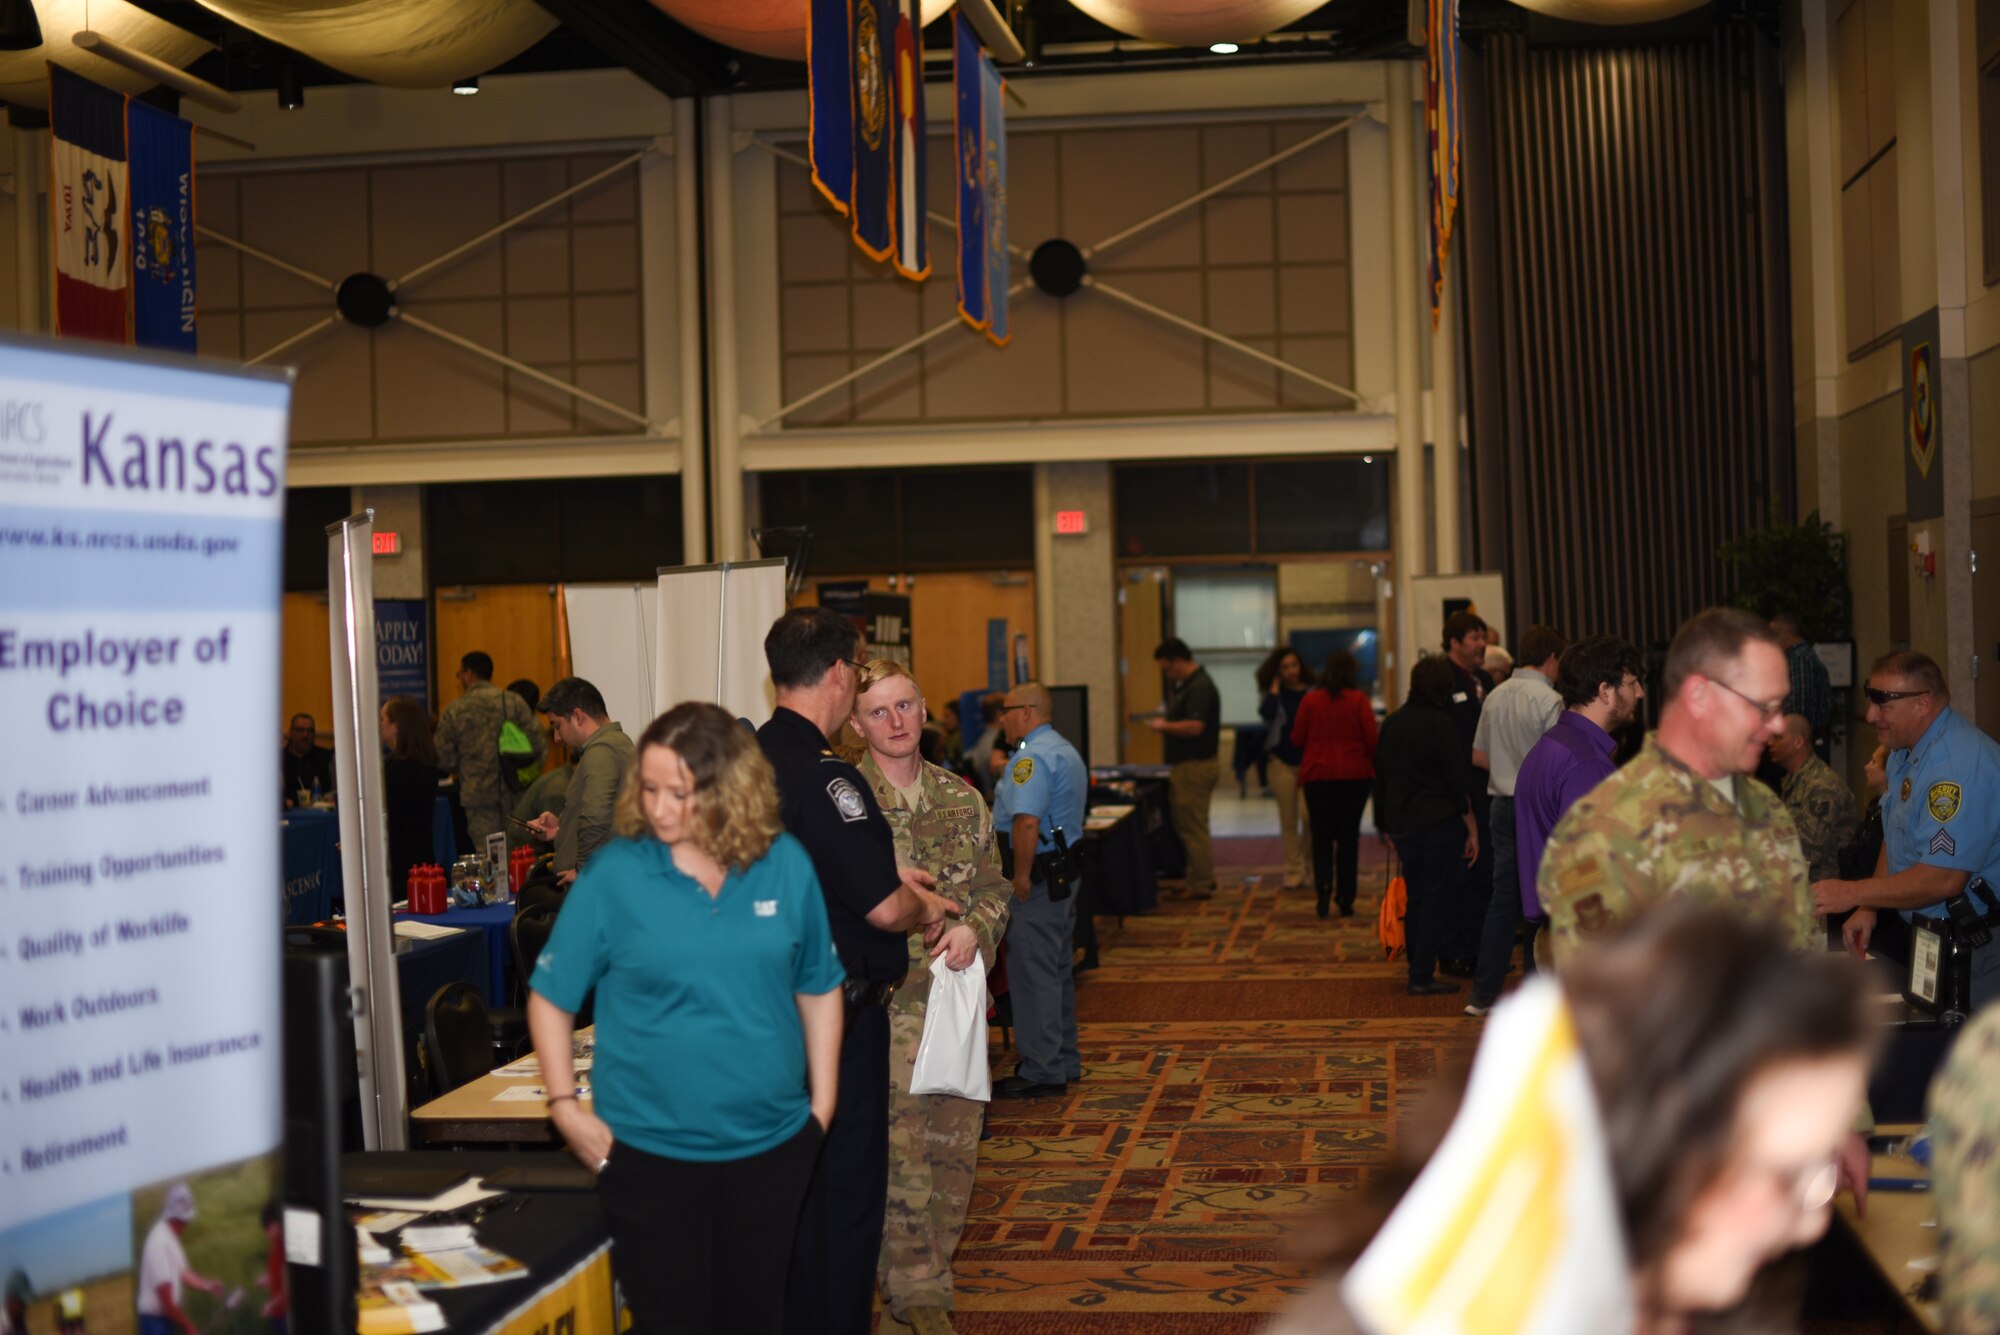 Members of McConnell visit the job fair March 20, 2019 at McConnell Air Force Base, Kan. The job fair was open to active duty, spouses, civilians, retirees and veterans looking for future employment. (U.S. Air Force photo by Airman 1st Class Alexi Myrick)